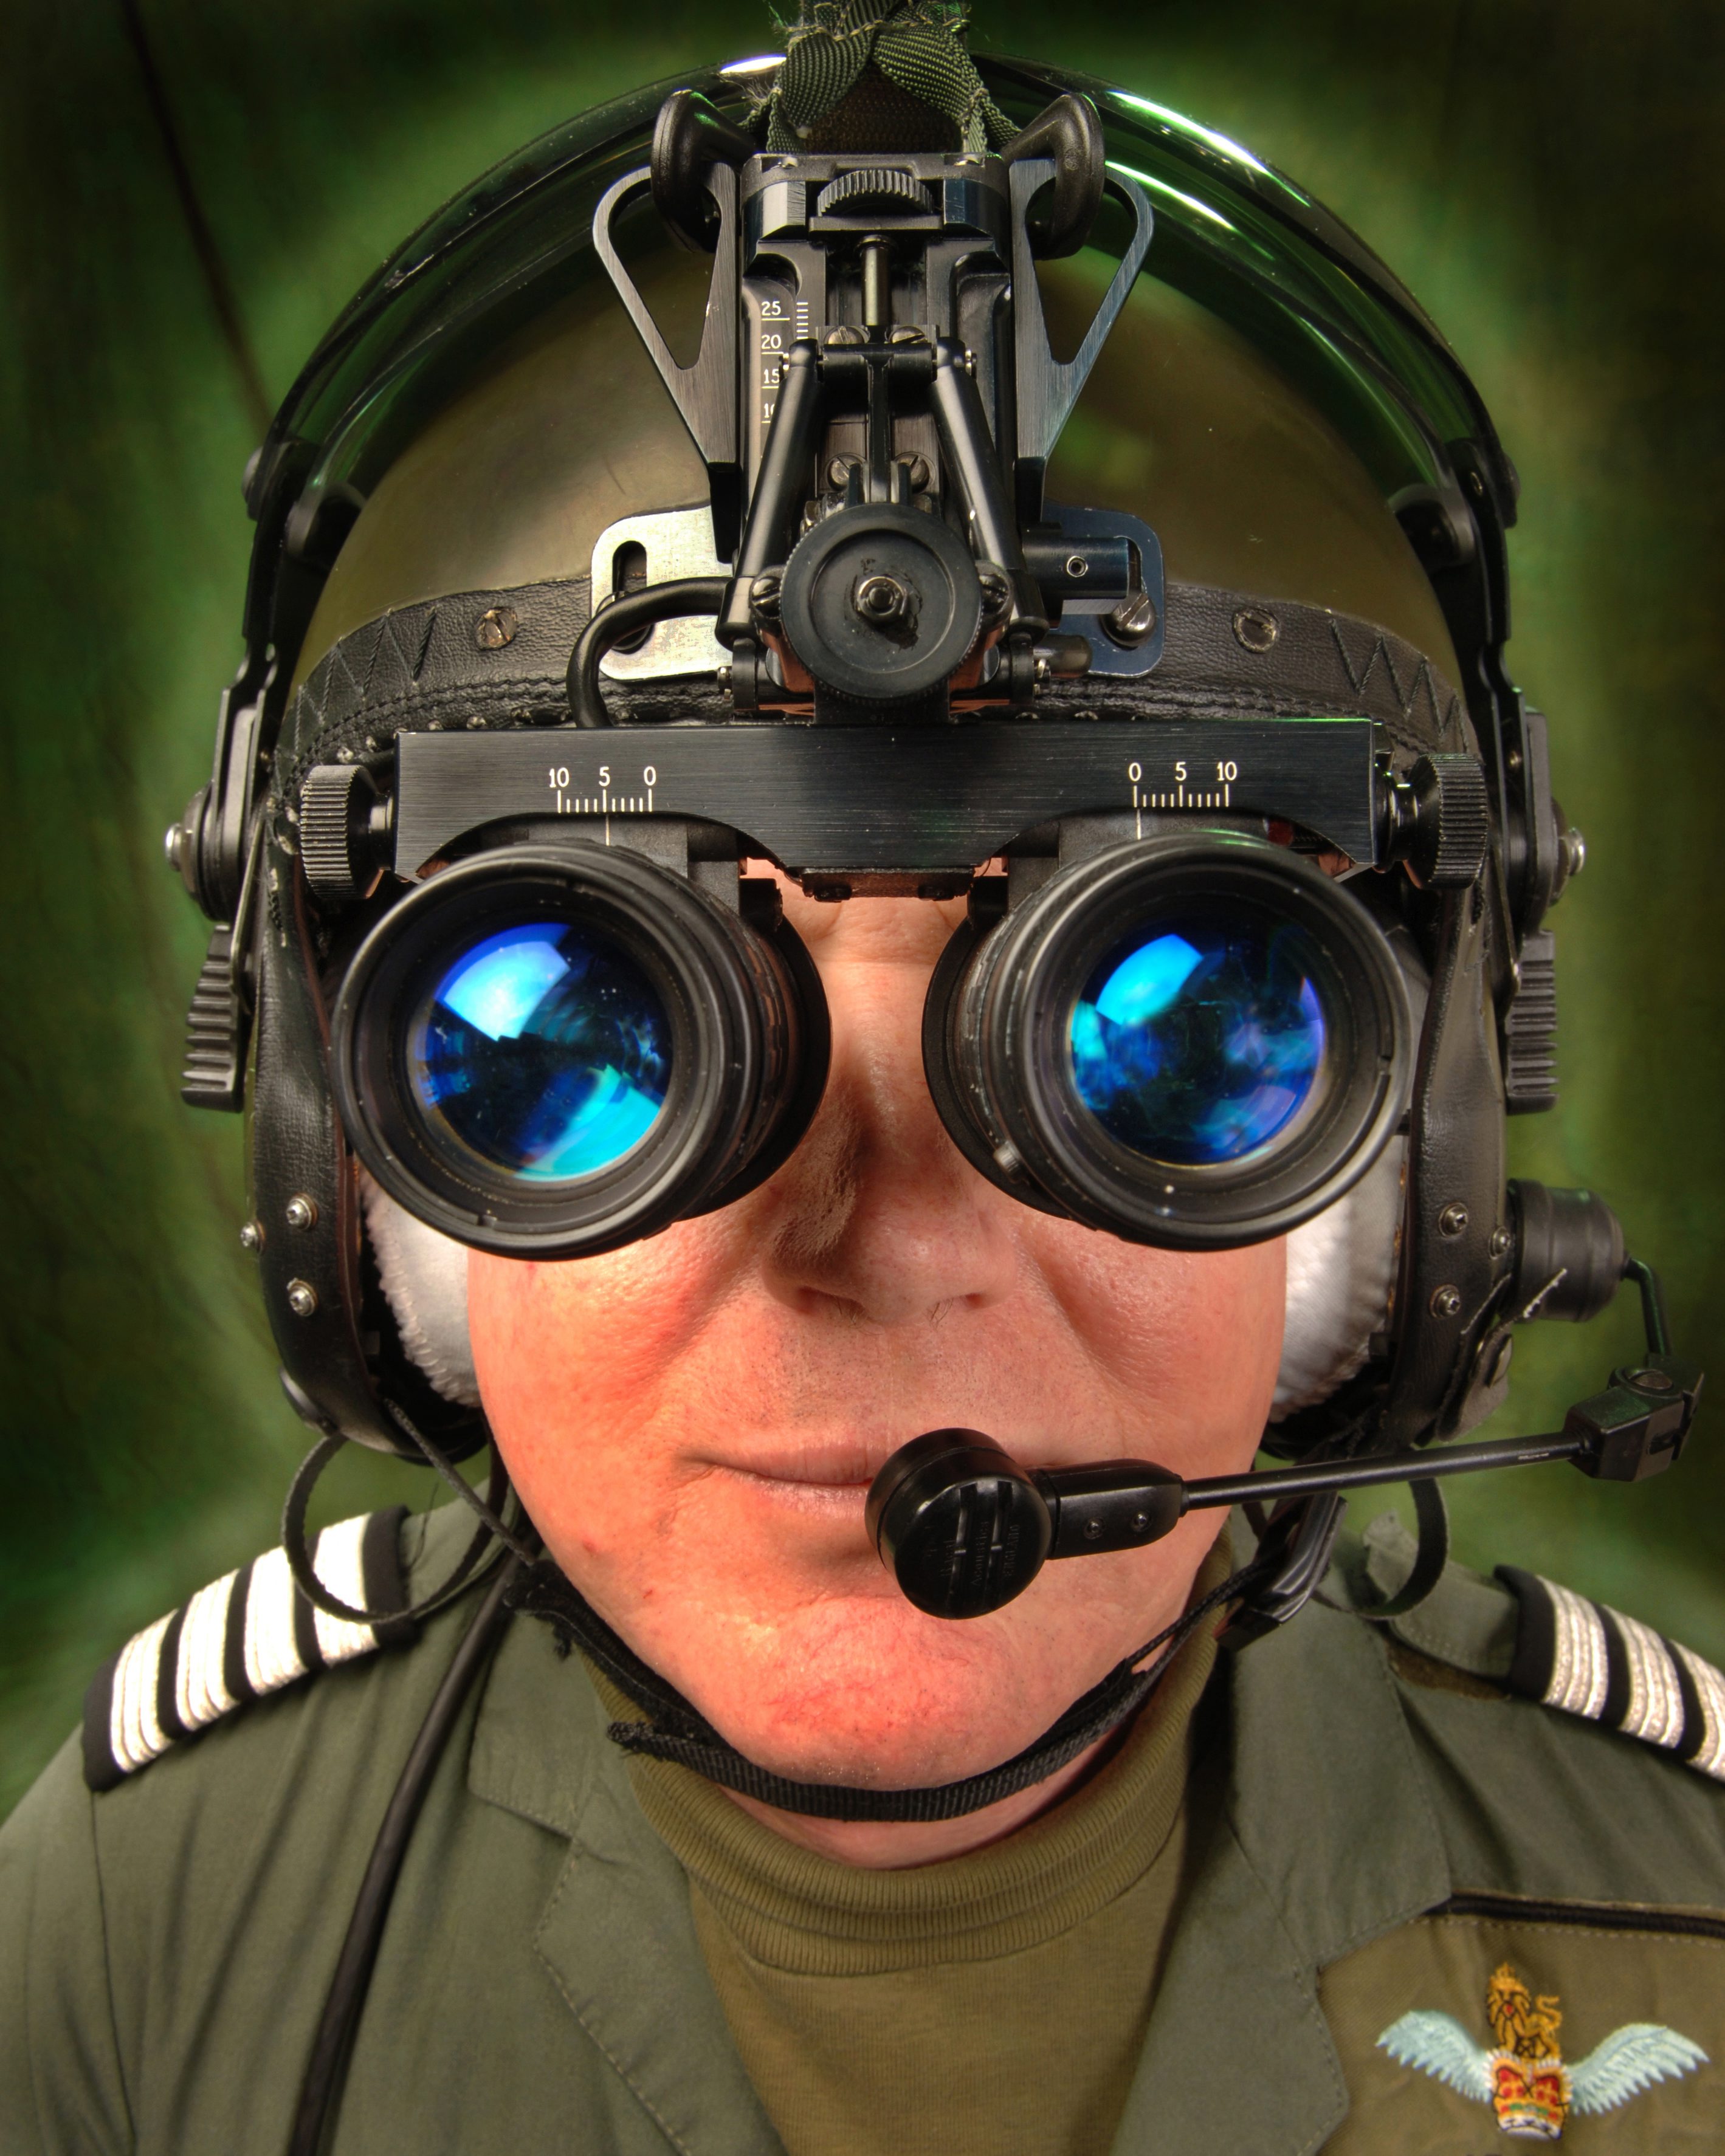 File:A member of aircrew being fitted with goggles at RAF Shawbury MOD 45147057.jpg - Wikimedia Commons